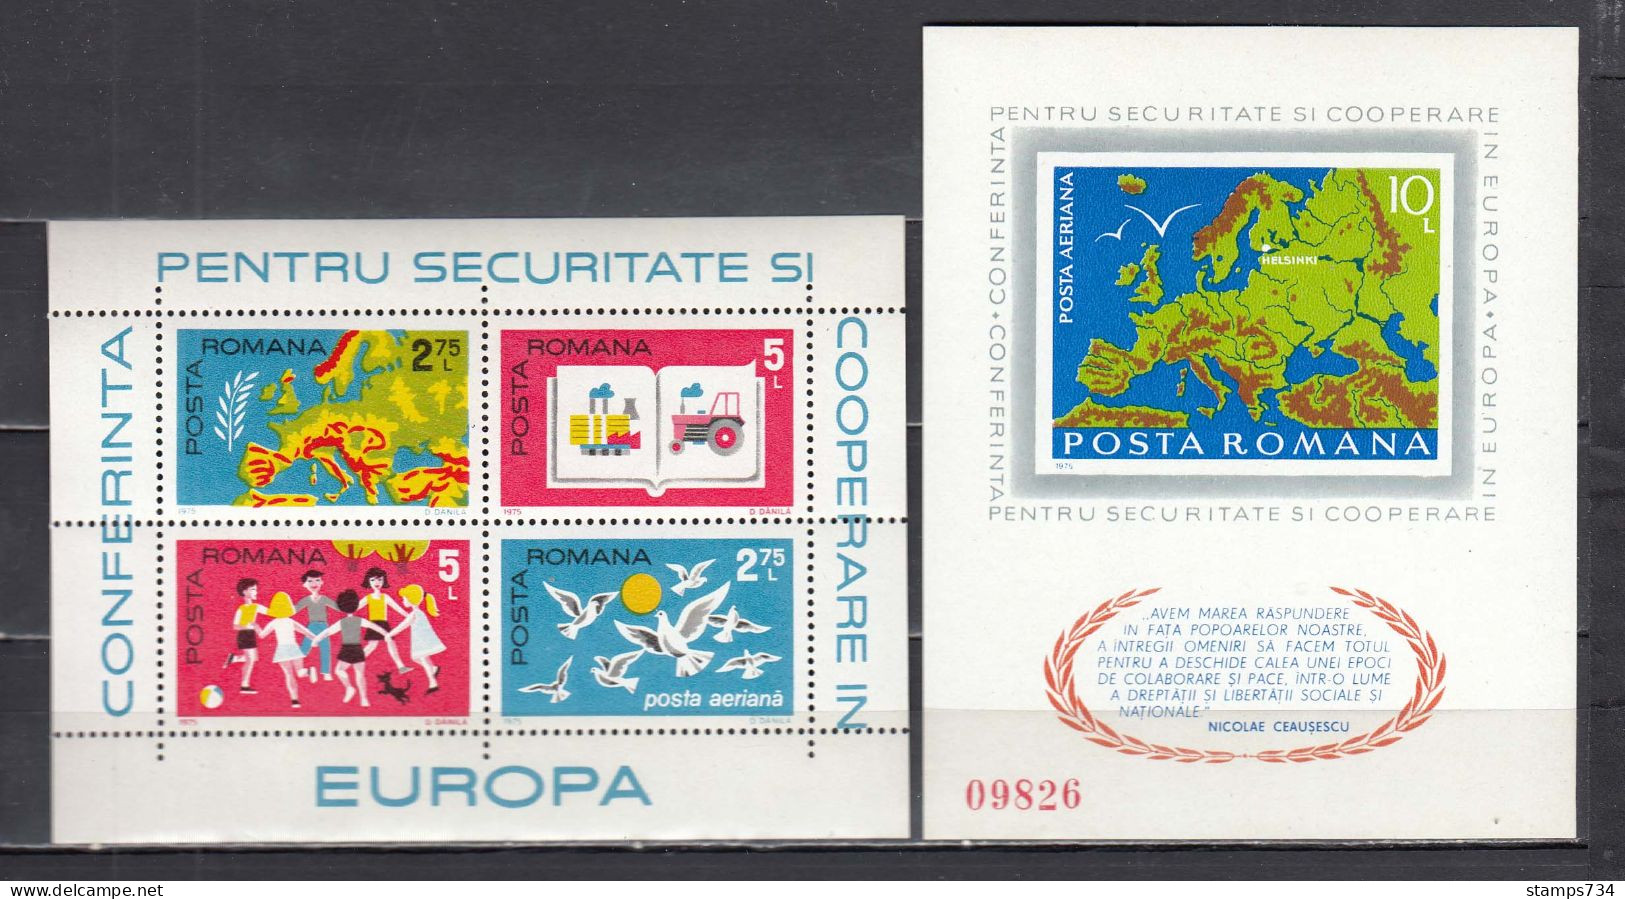 Romania 1975 - Conference On Security And Cooperation In Europe (CSCE), Mi-Nr. Block 124/125, MNH** - Nuevos